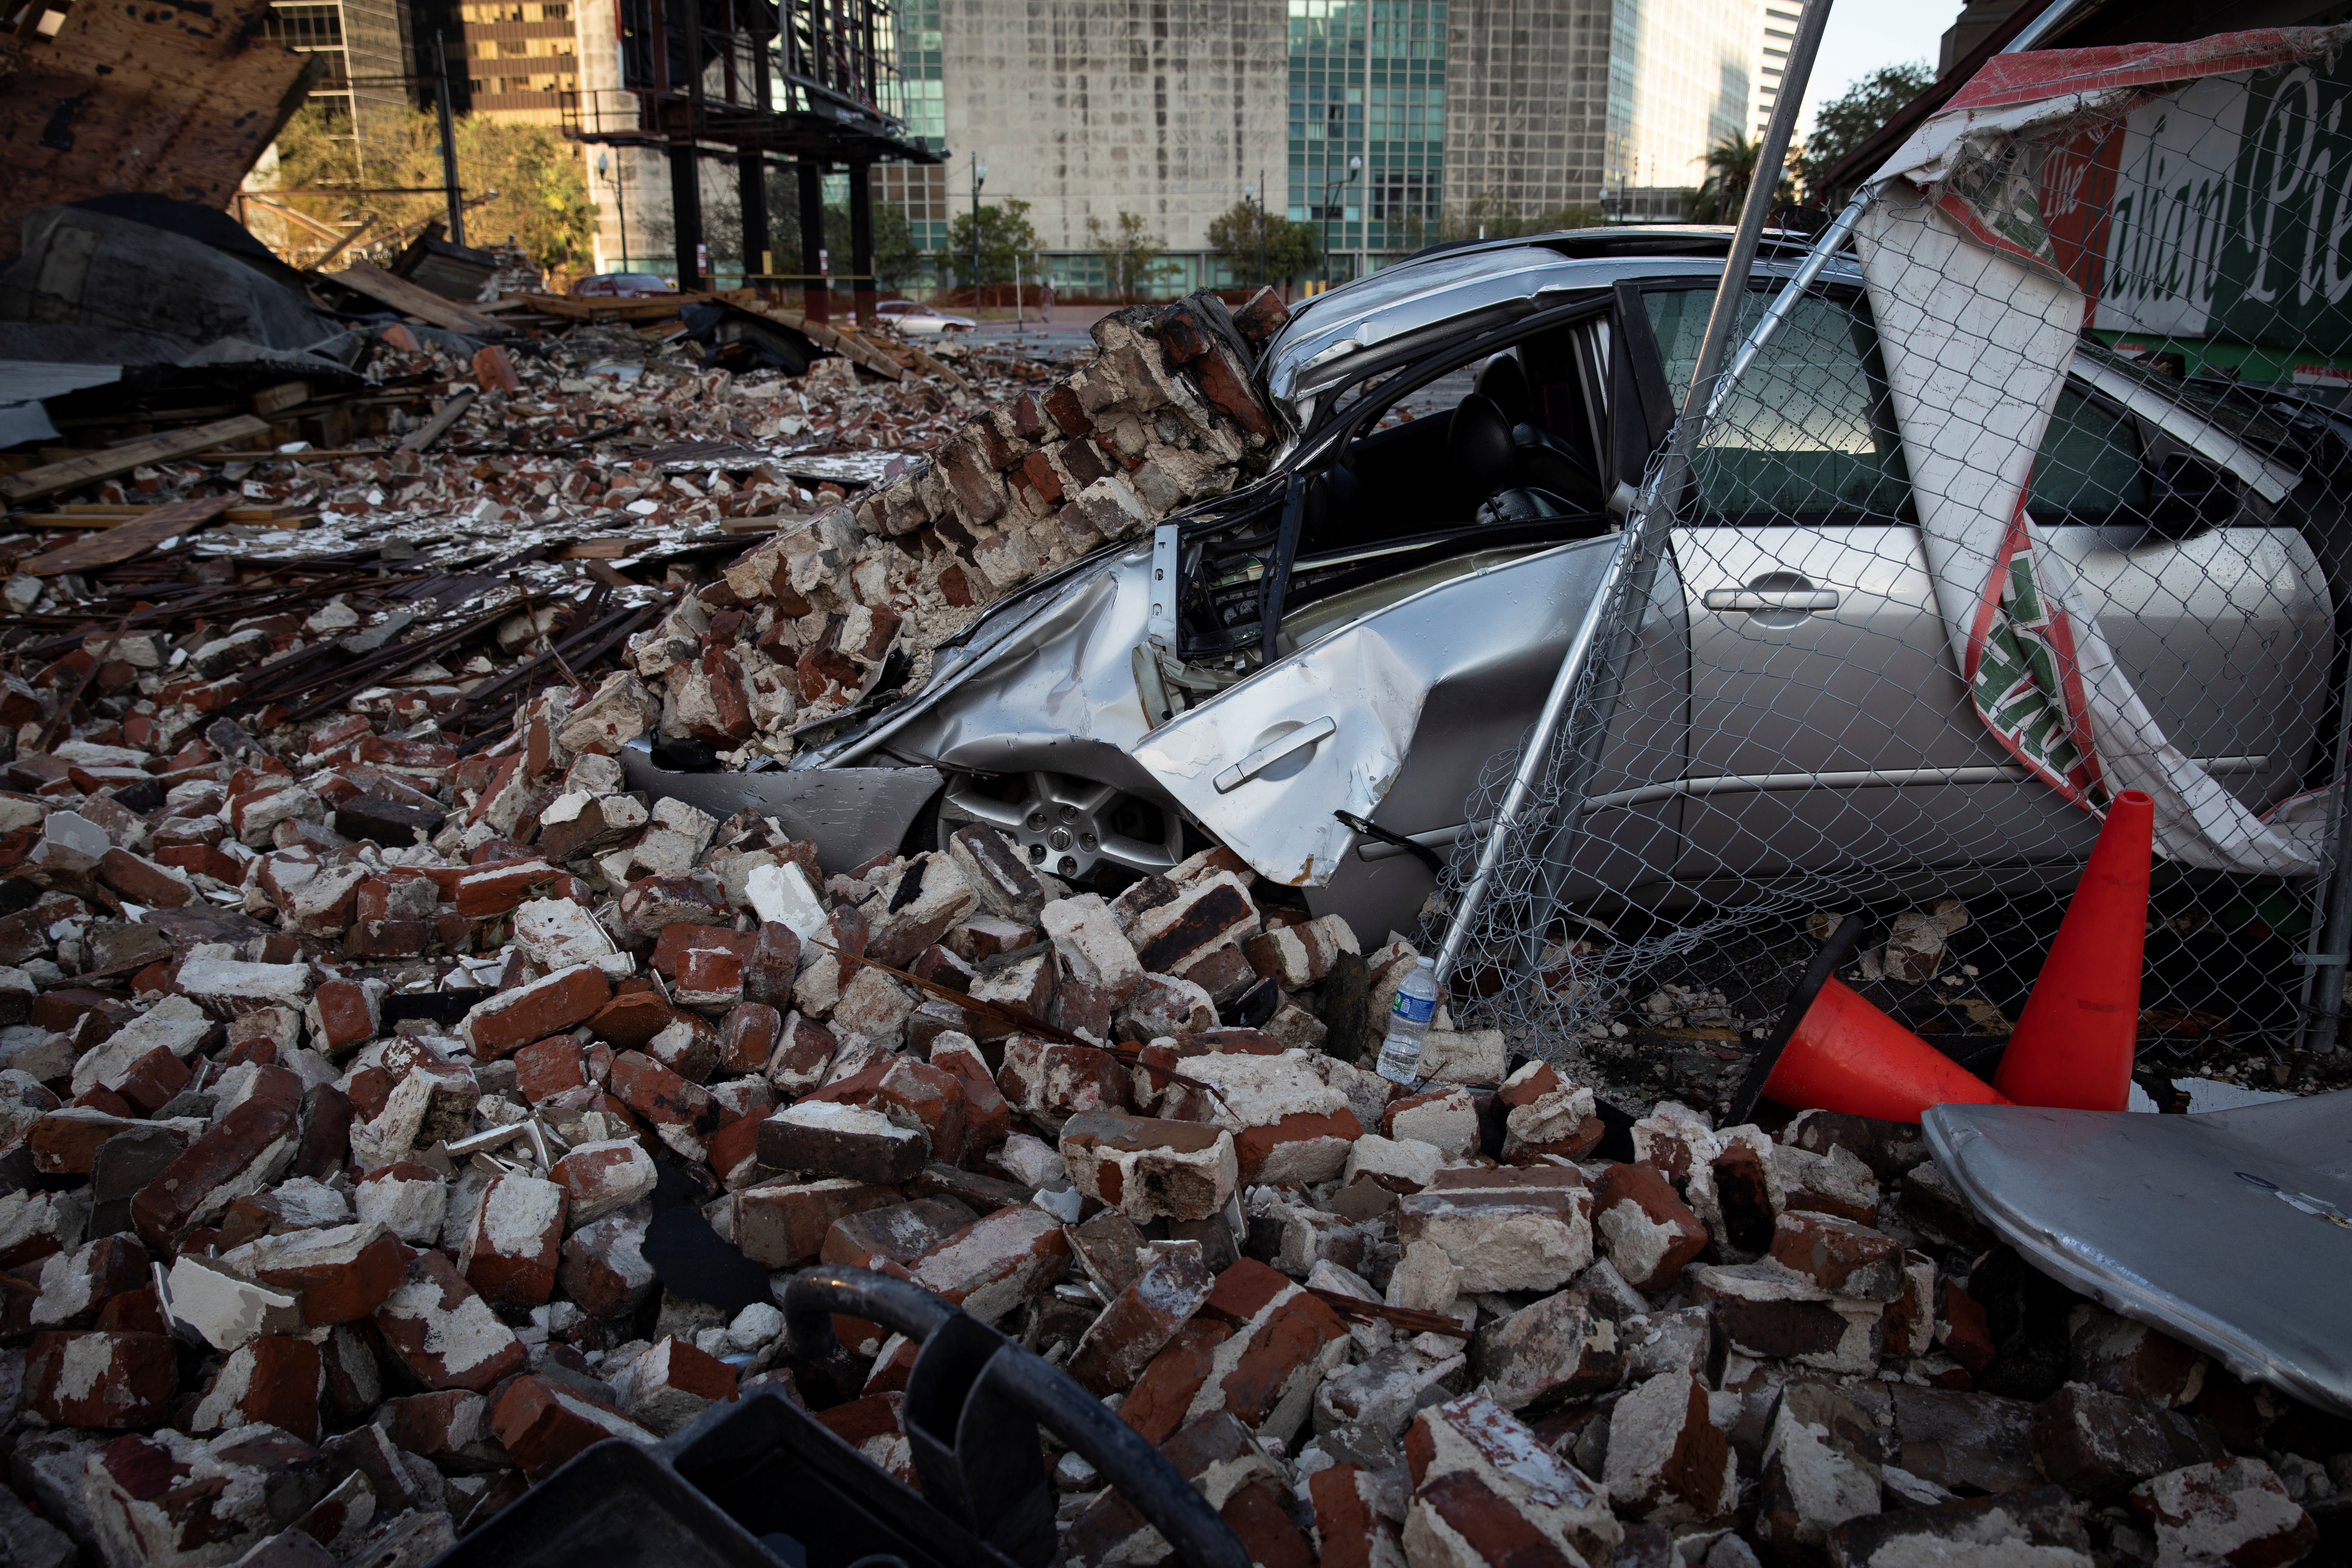 A destroyed car is seen under the debris of a building after Hurricane Ida made landfall in Louisiana, U.S., August 31, 2021. REUTERS/Marco Bello